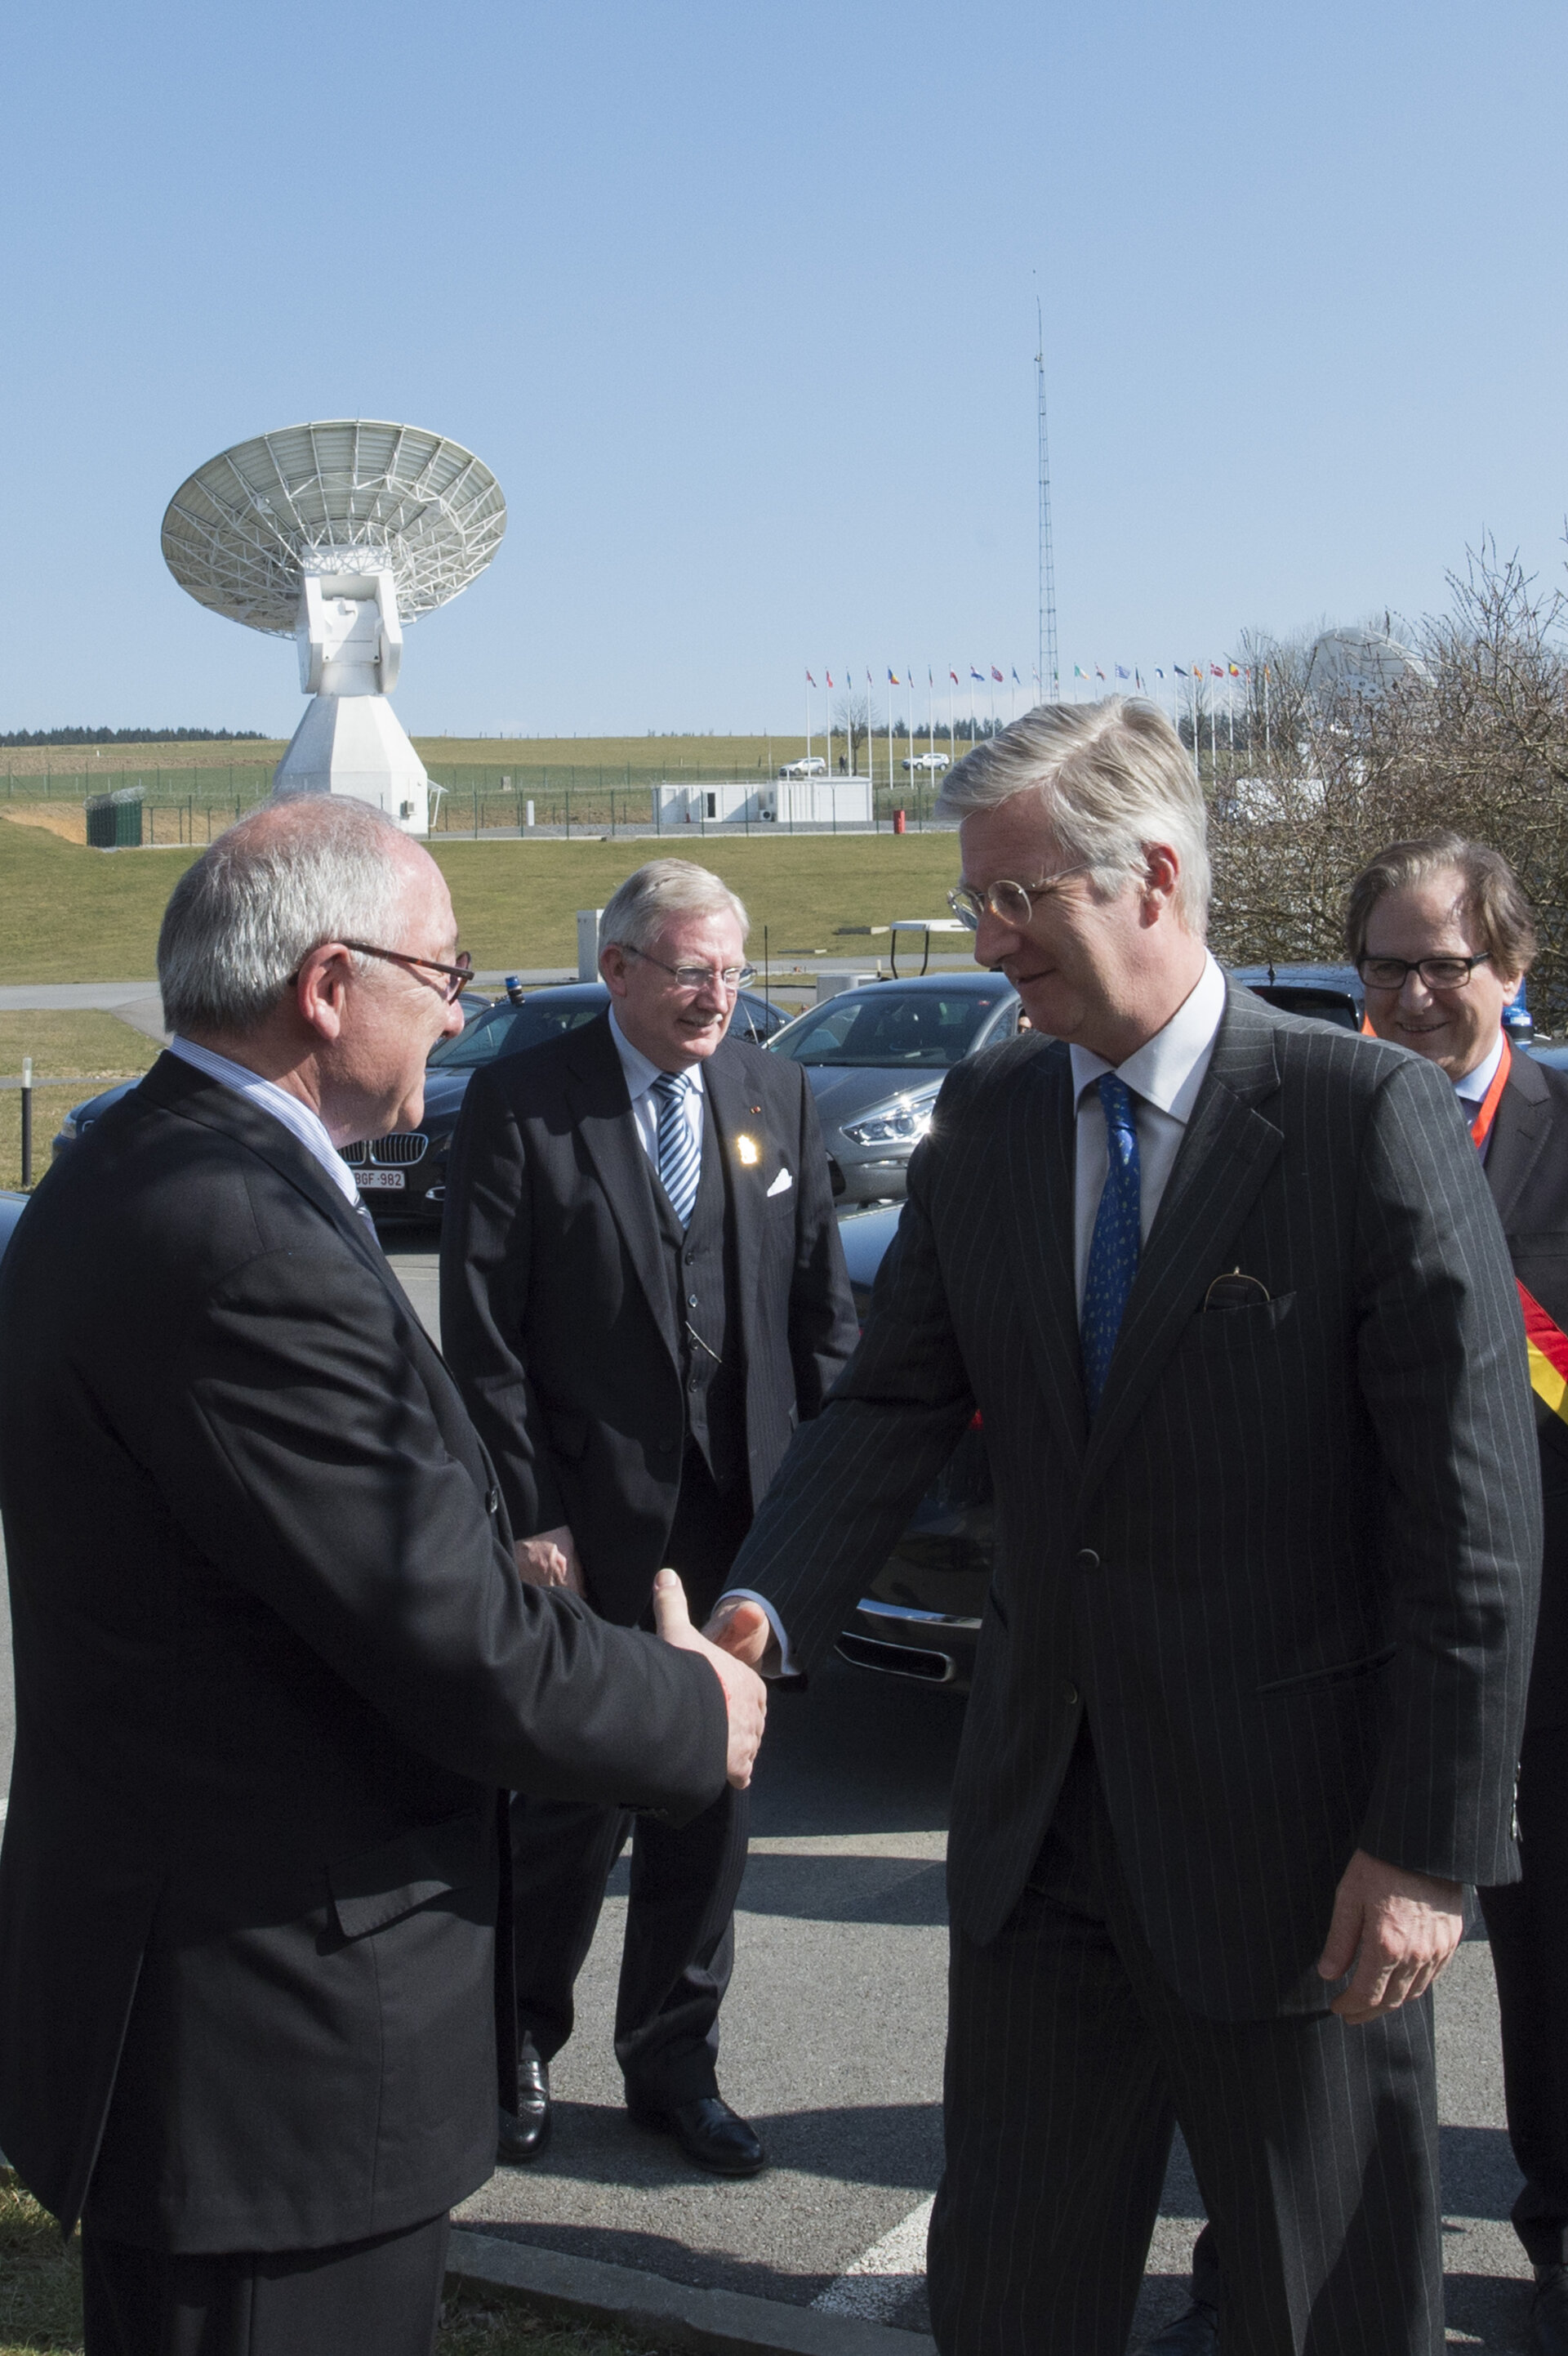 Jean-Jacques Dordain welcomes King Philippe of Belgium